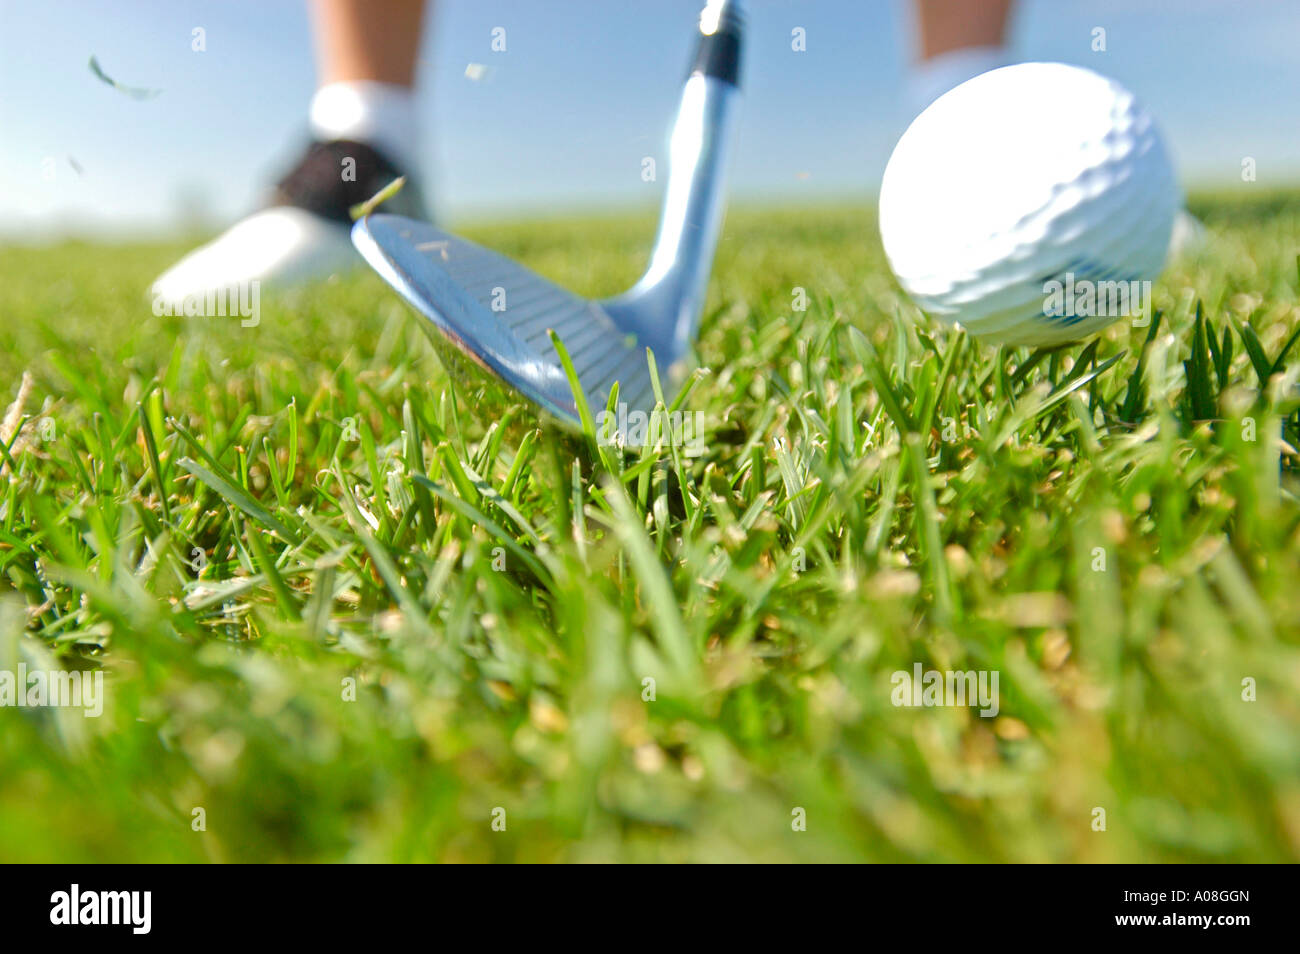 Page 2 - Golf Clubs Close Up High Resolution Stock Photography and Images -  Alamy